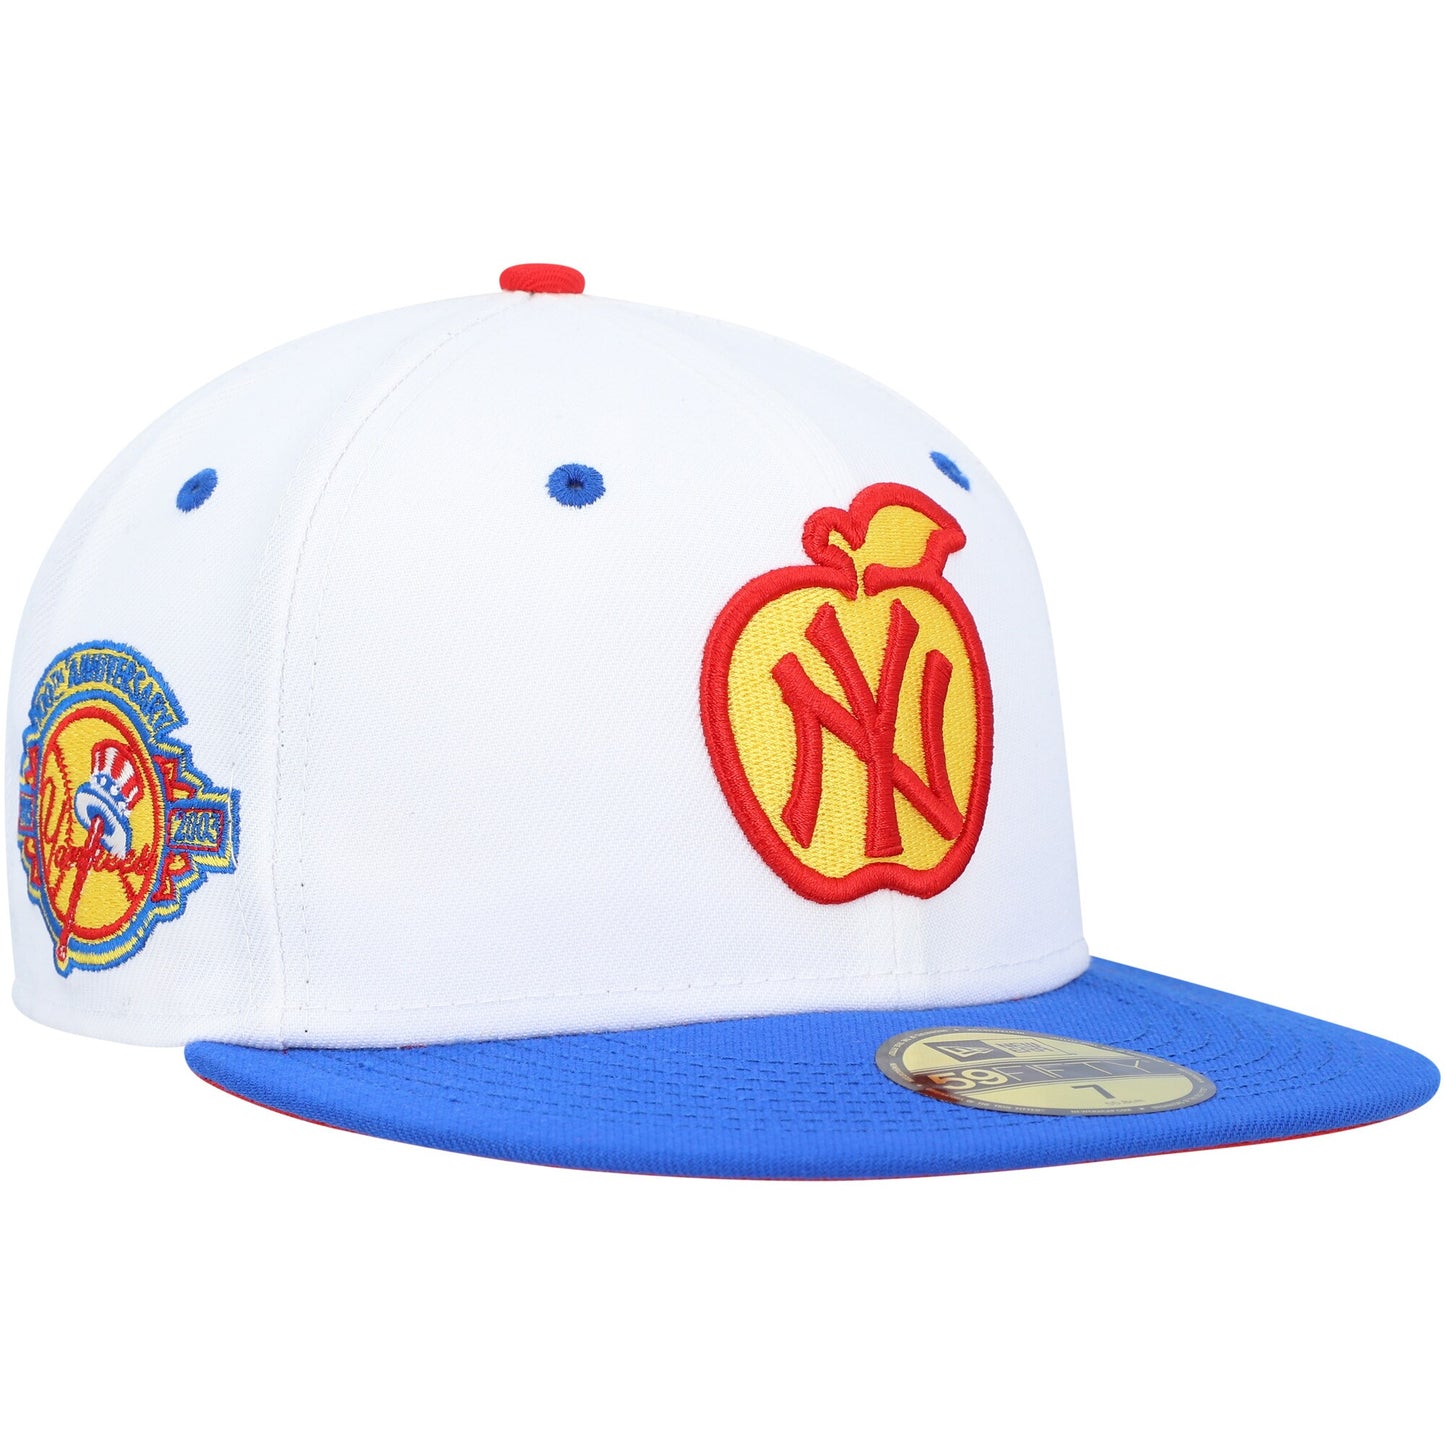 New York Yankees New Era 100th Anniversary Cherry Lolli 59FIFTY Fitted Hat - White/Royal